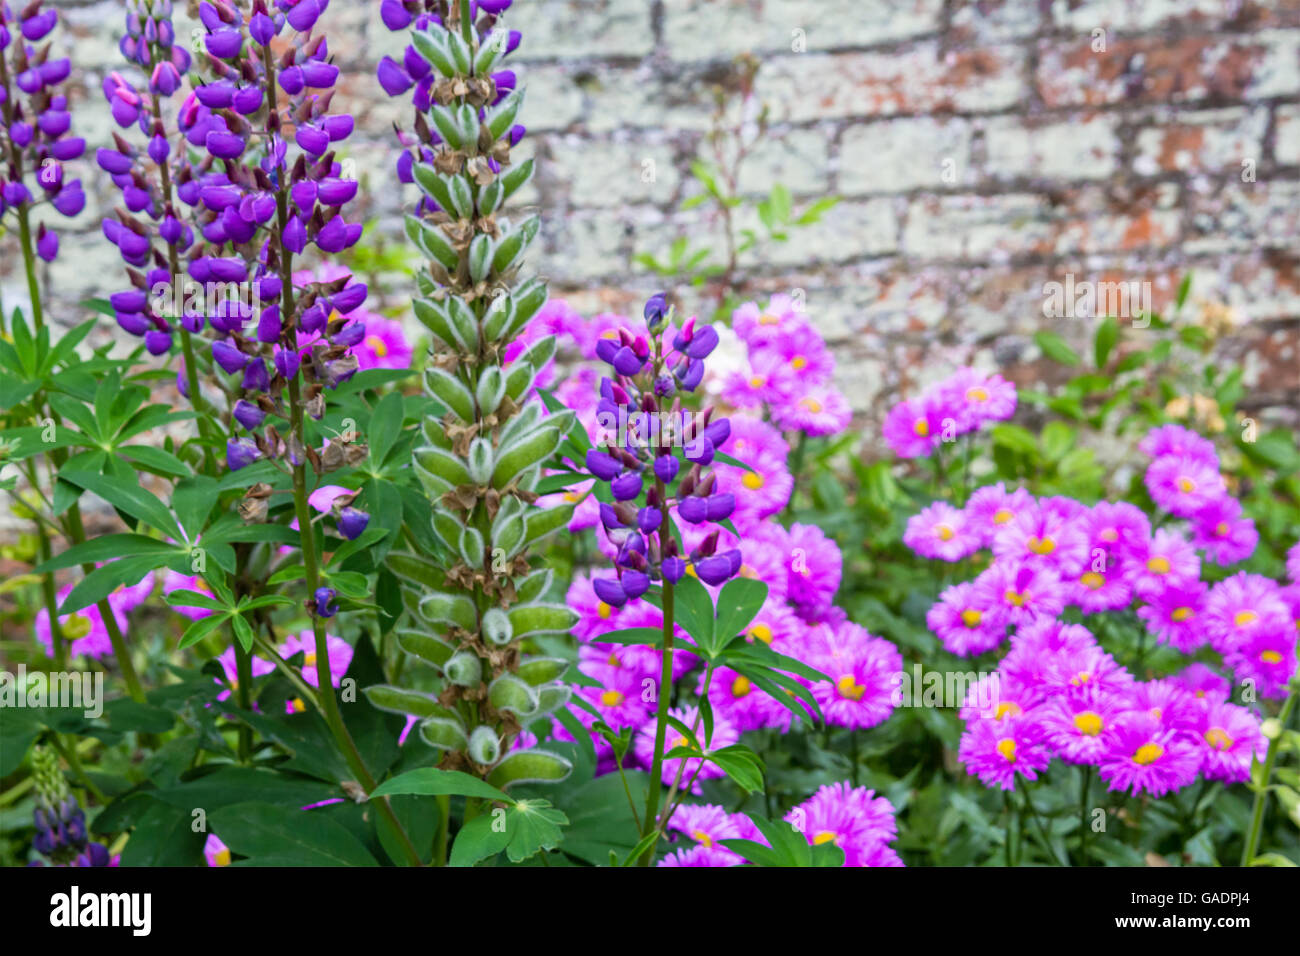 Beautiful, violet flowers blooming in the garden against old brick wall Stock Photo